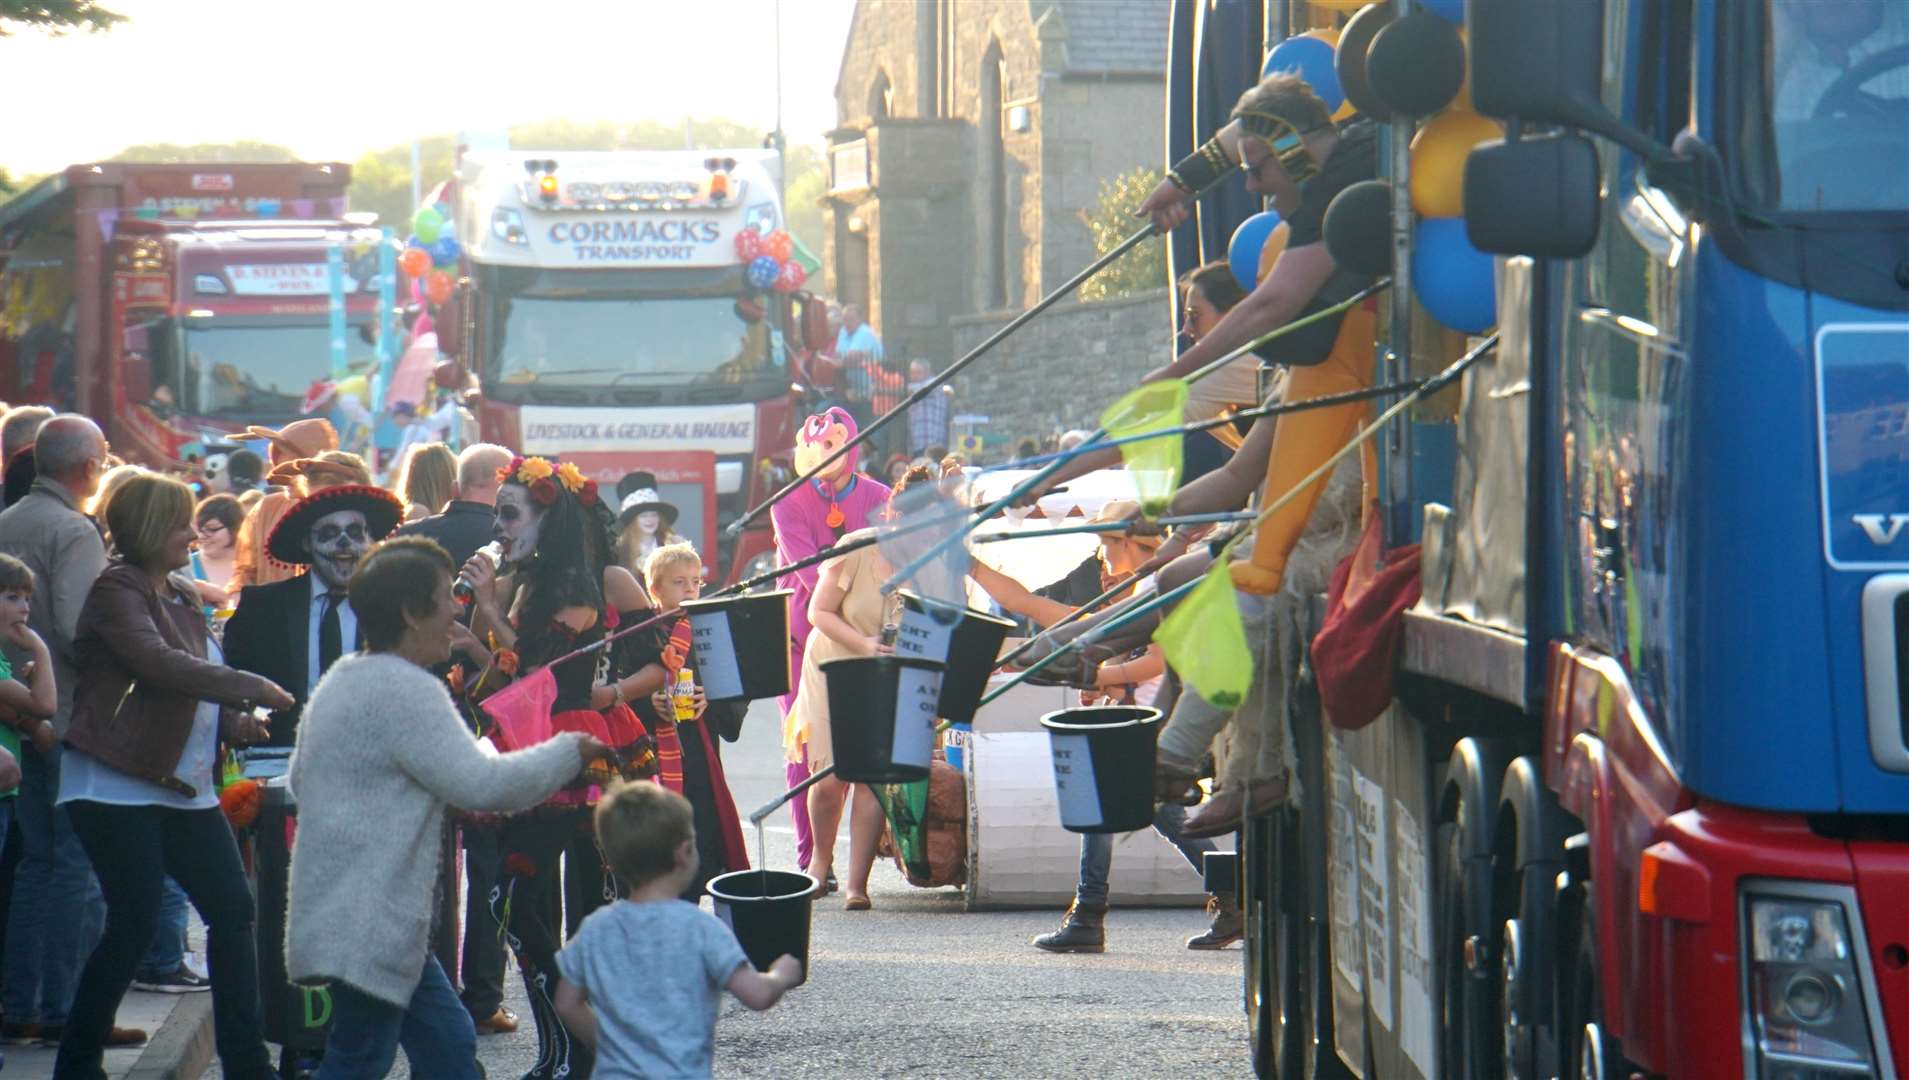 The gala procession – traditionally a highlight of the year for Wickers. Picture: DGS